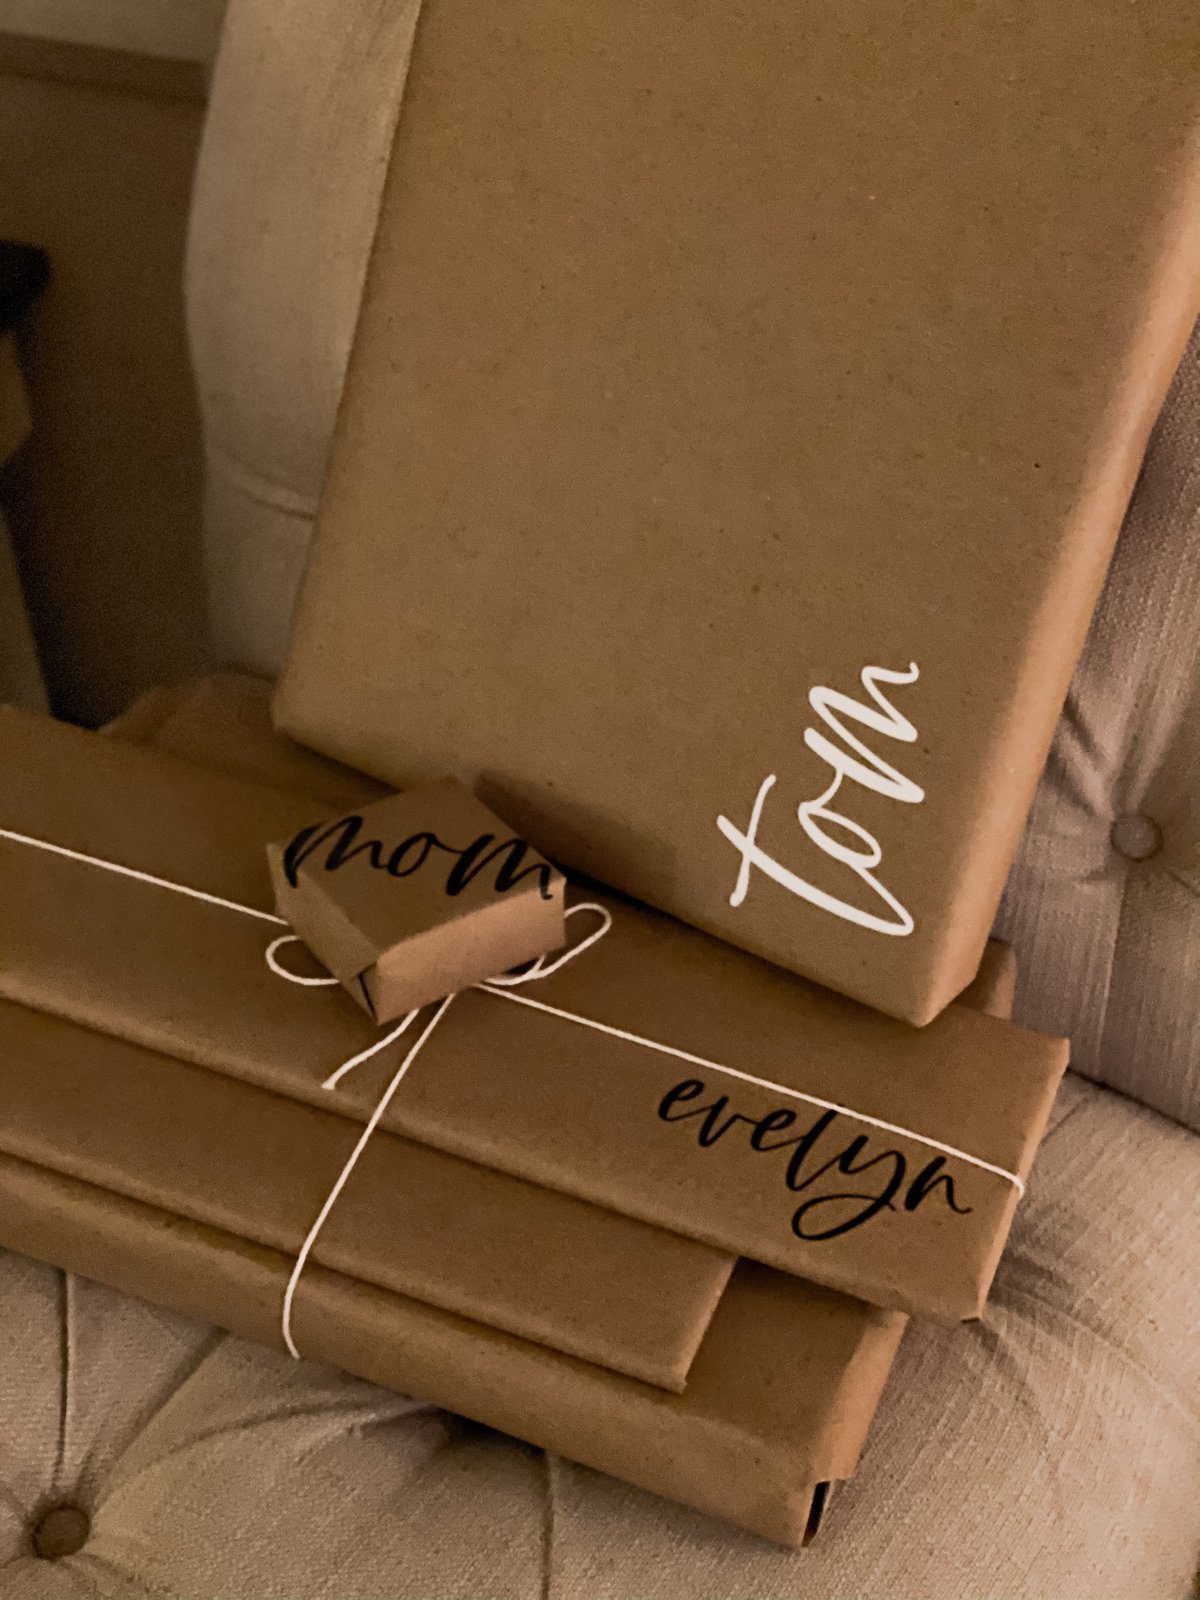 Last Minute Gift Wrapping with Cricut Joy